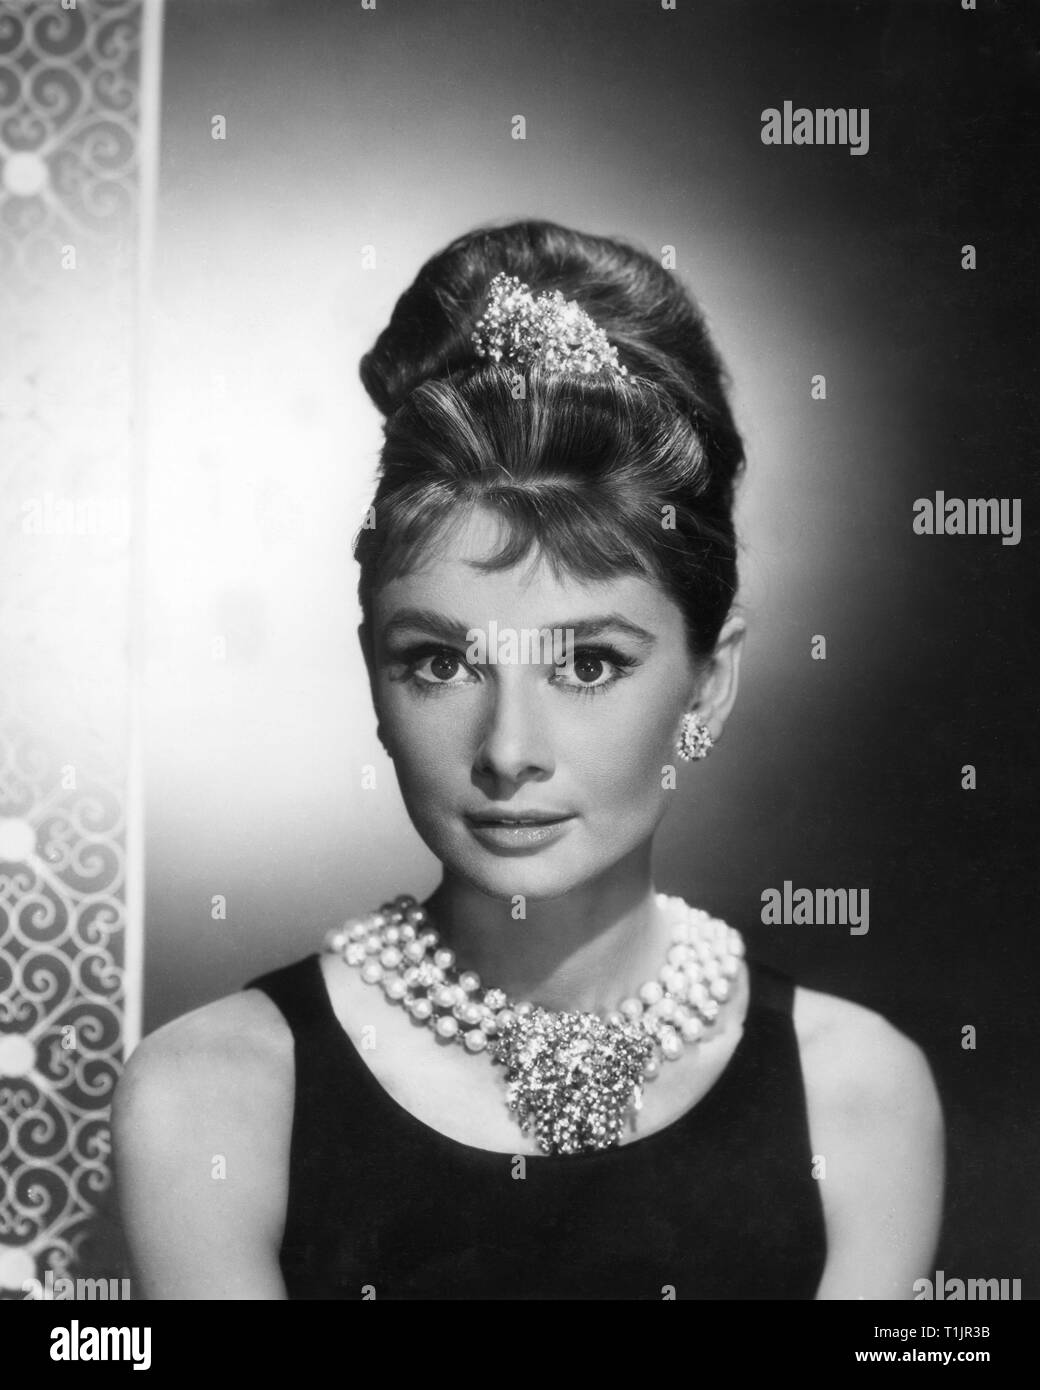 AUDREY HEPBURN as Holly Golightly BREAKFAST AT TIFFANY'S 1961 director Blake Edwards Jurow-Shepherd / Paramount Pictures Stock Photo